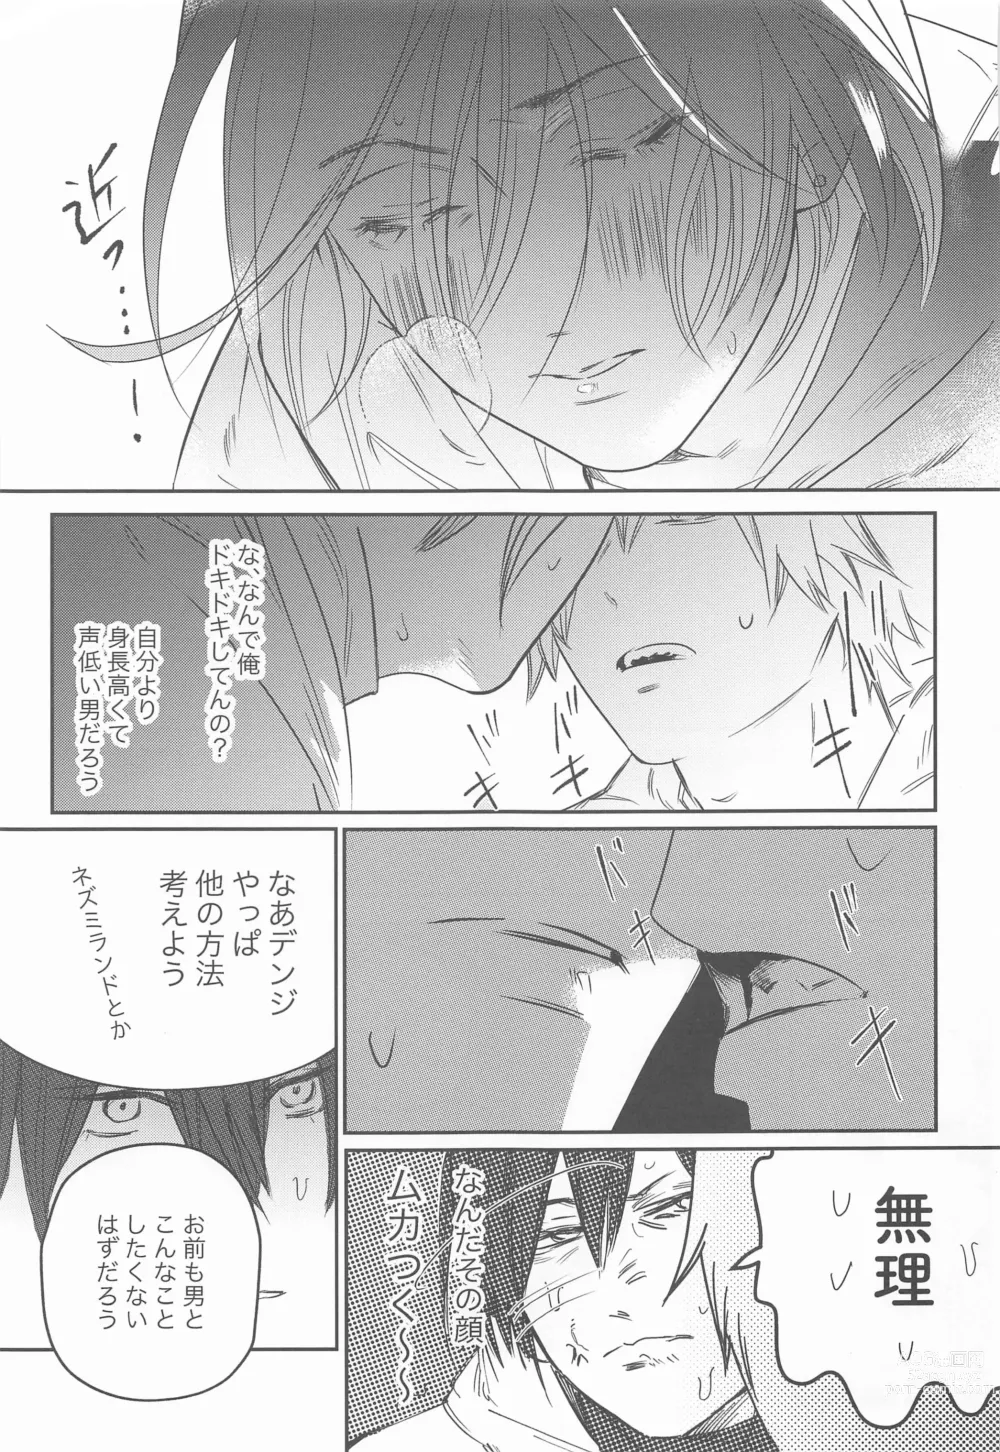 Page 34 of doujinshi Adazakura - Gone with the Blossoms